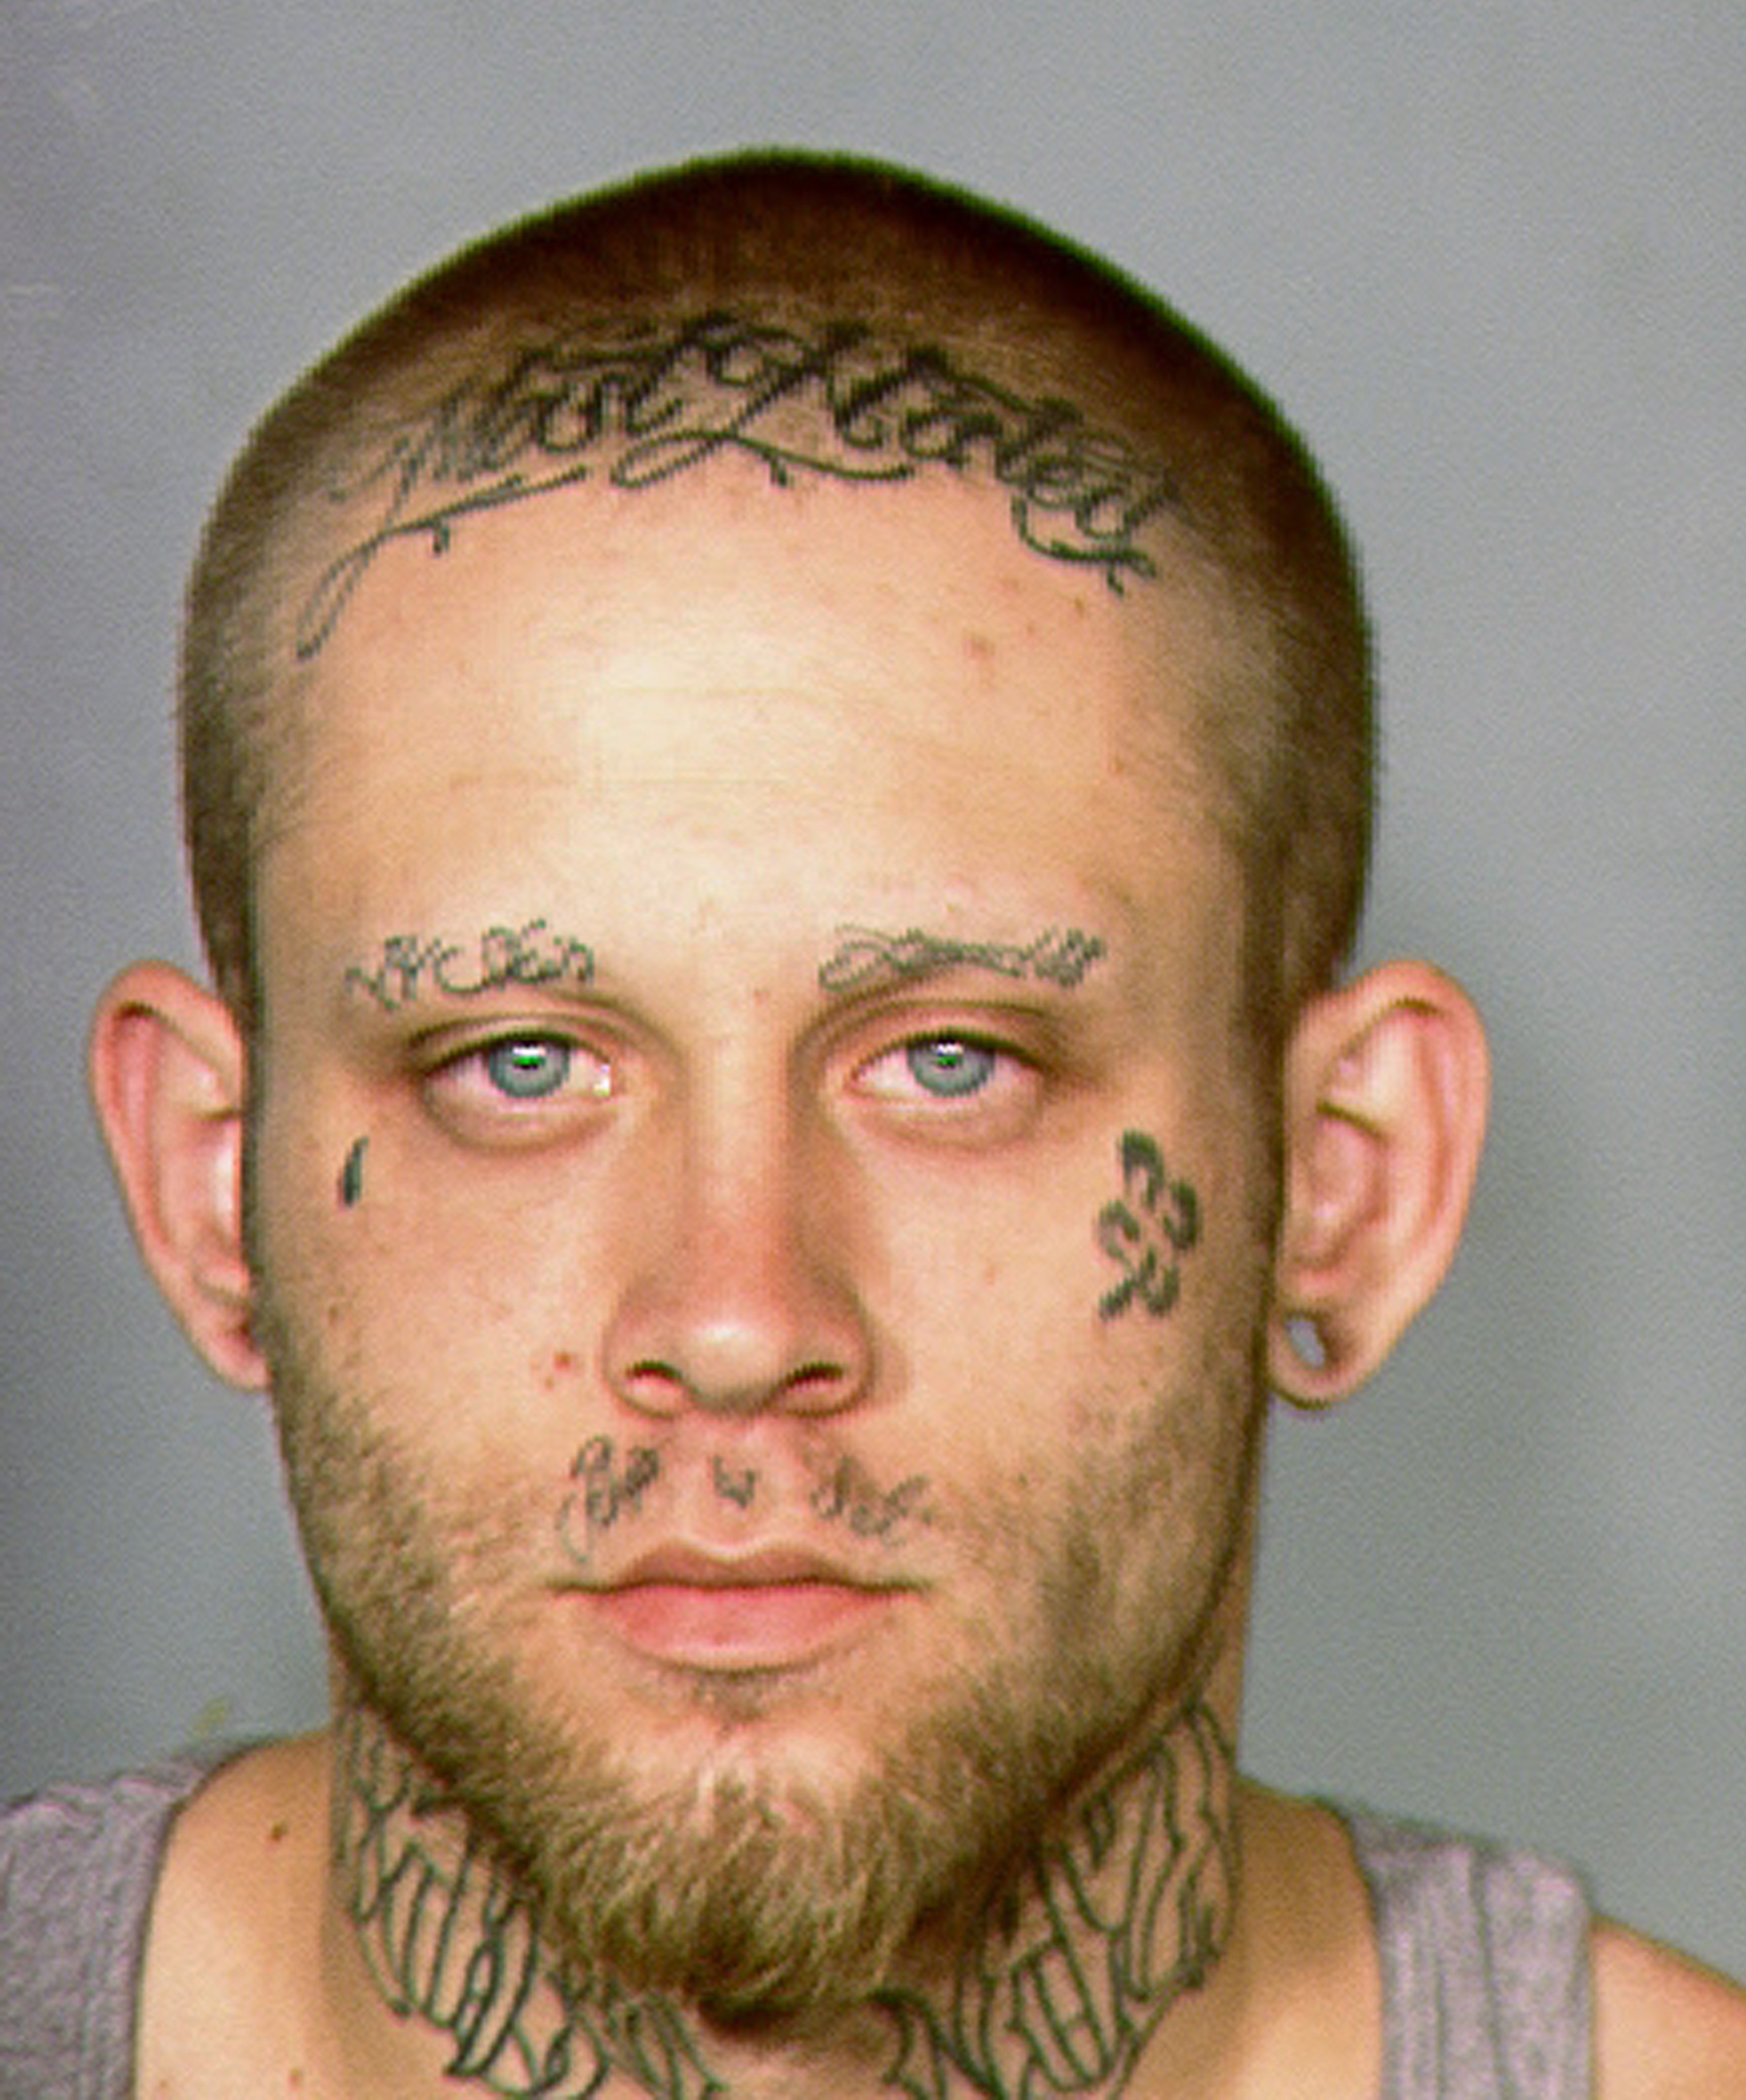 This 2013 law enforcement booking photo provided by the Las Vegas Metropolitan Police Department shows Bayzle Morgan.